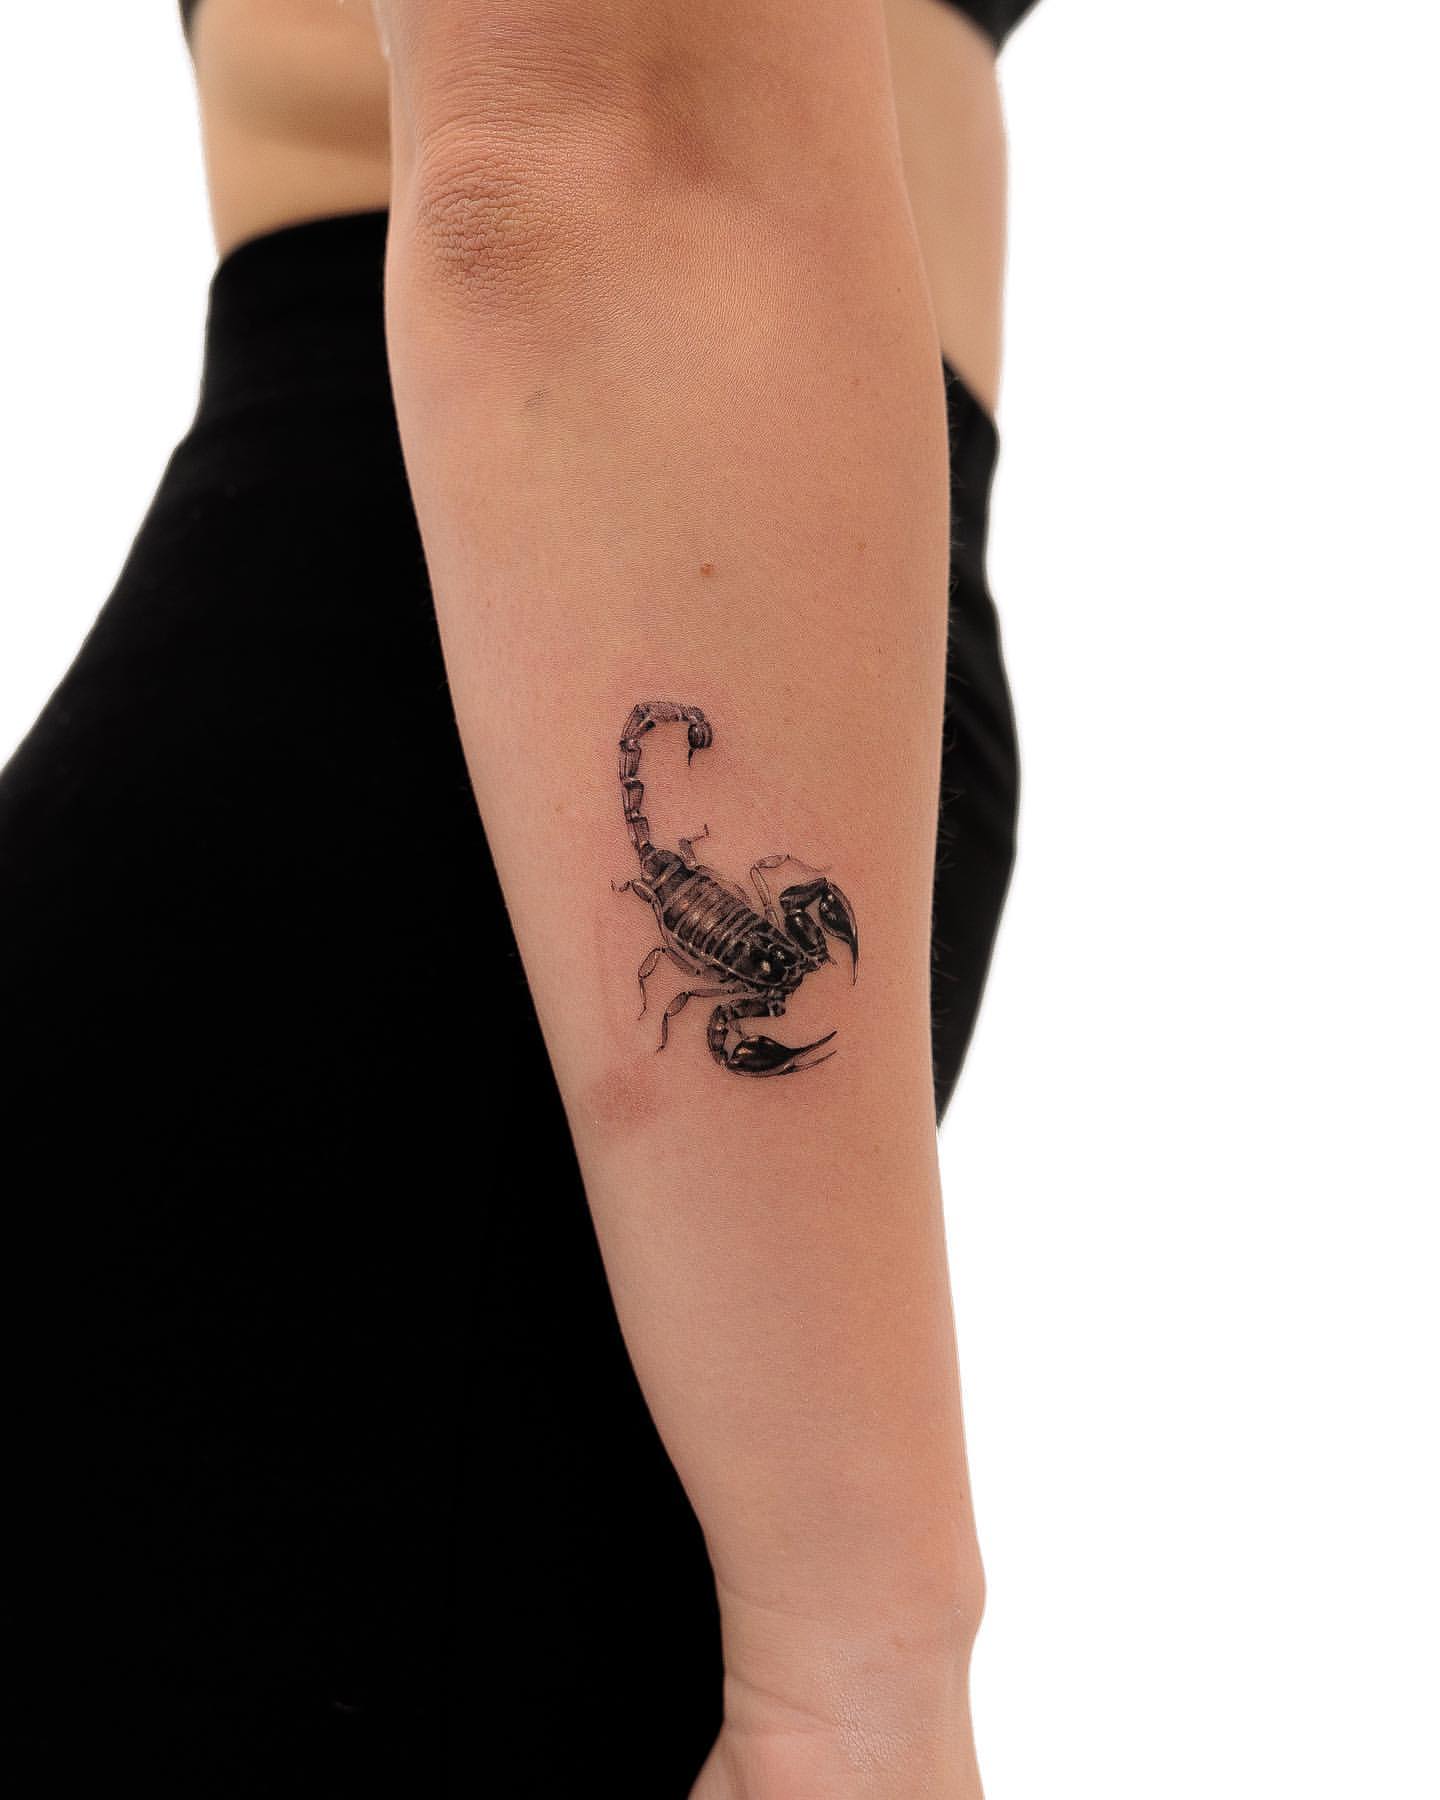 30 Best Scorpion Tattoos for Boys and Girls